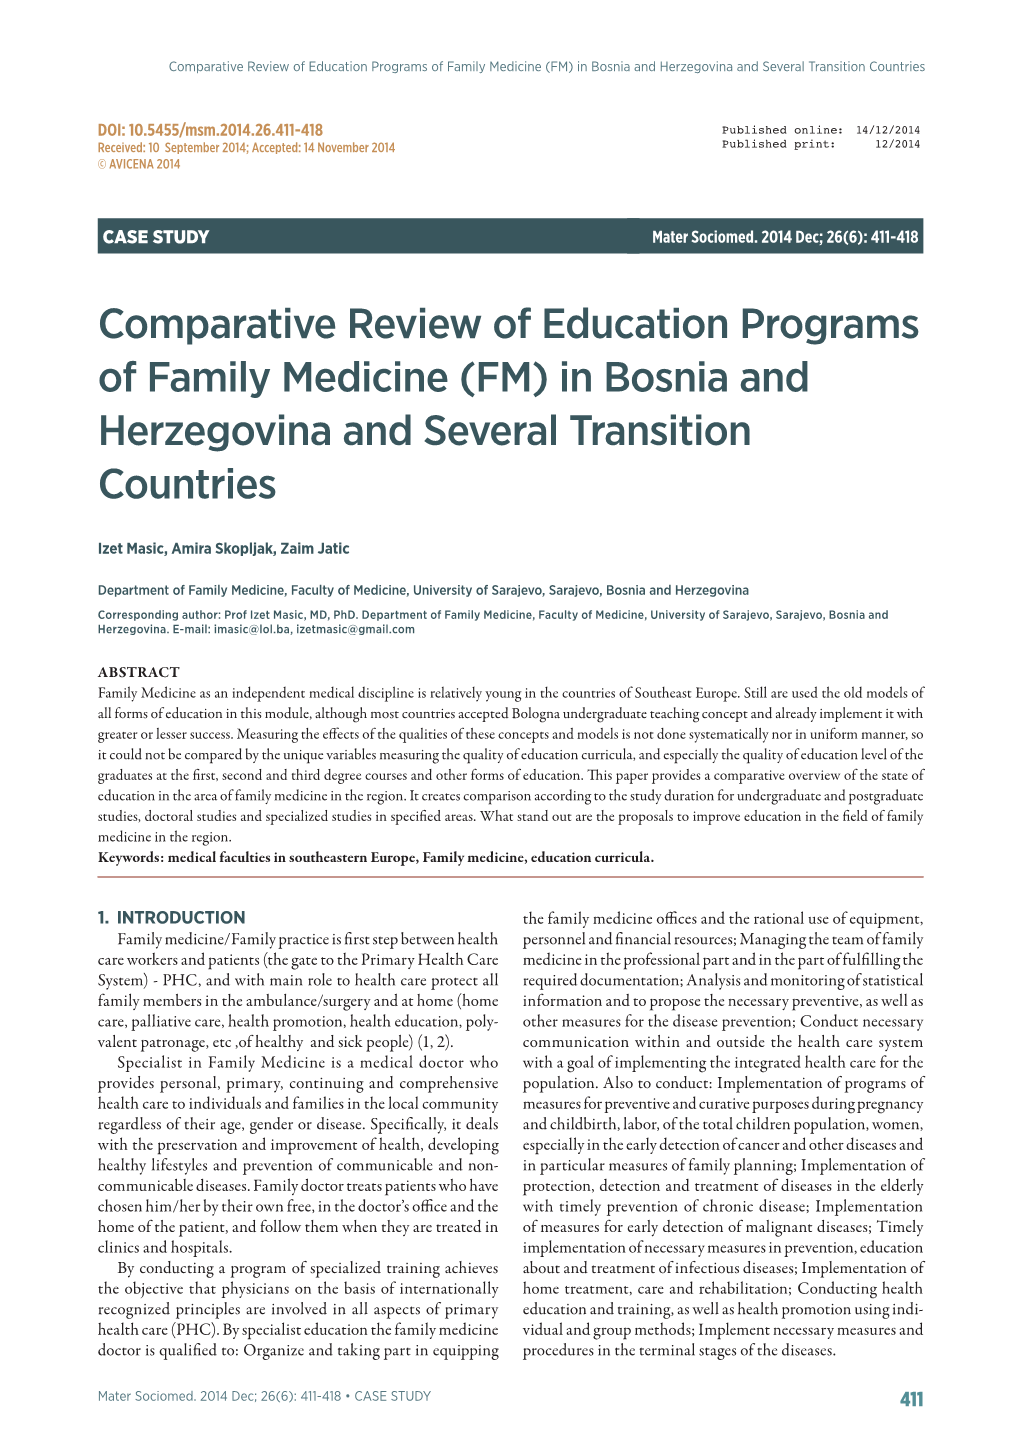 Comparative Review of Education Programs of Family Medicine (FM) in Bosnia and Herzegovina and Several Transition Countries